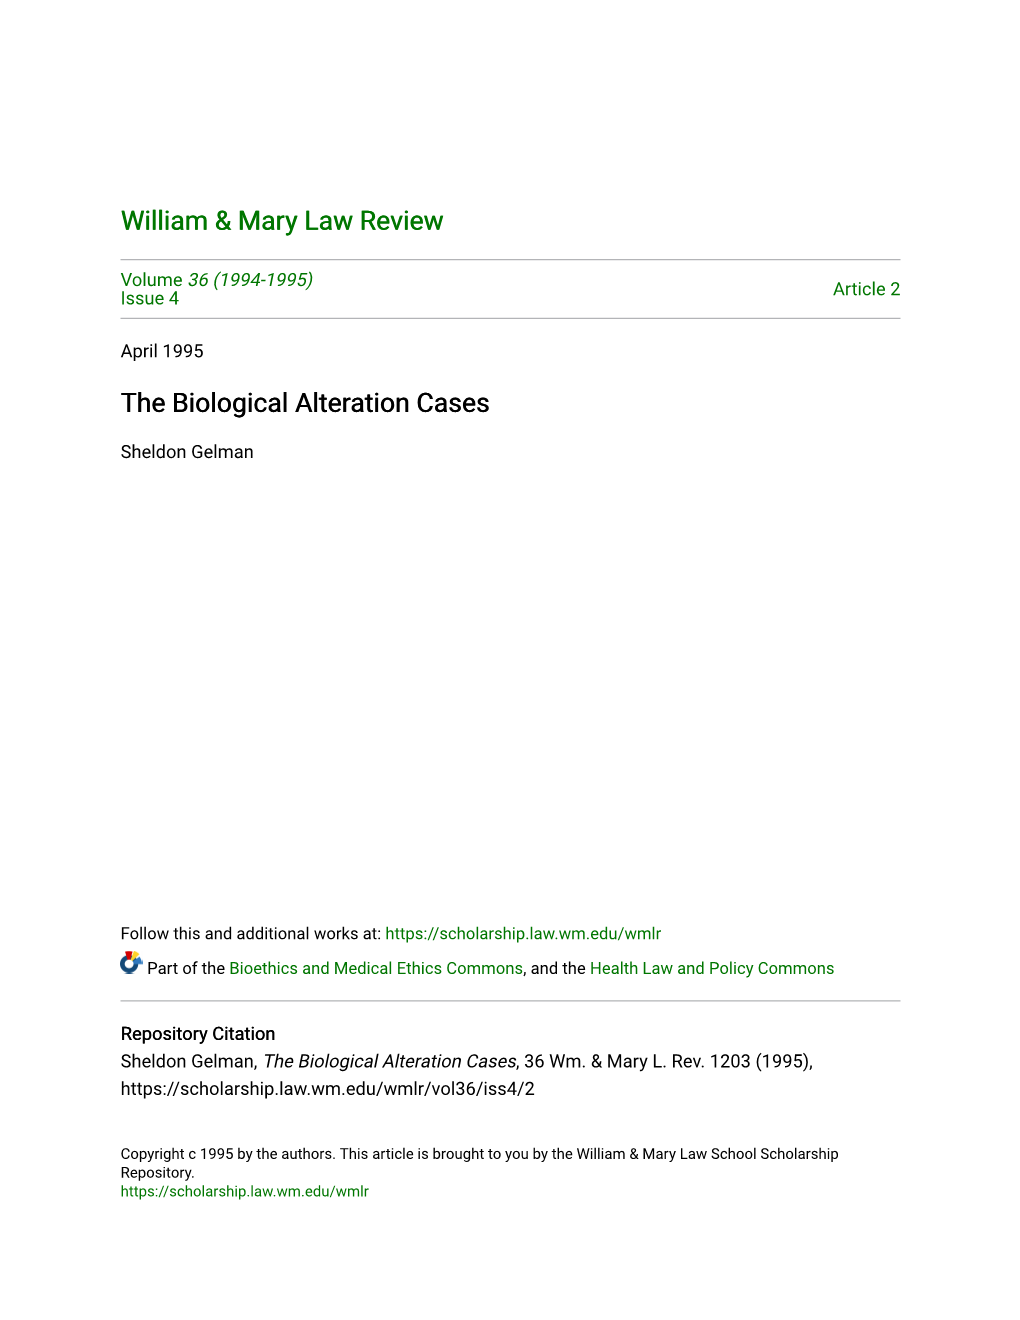 The Biological Alteration Cases